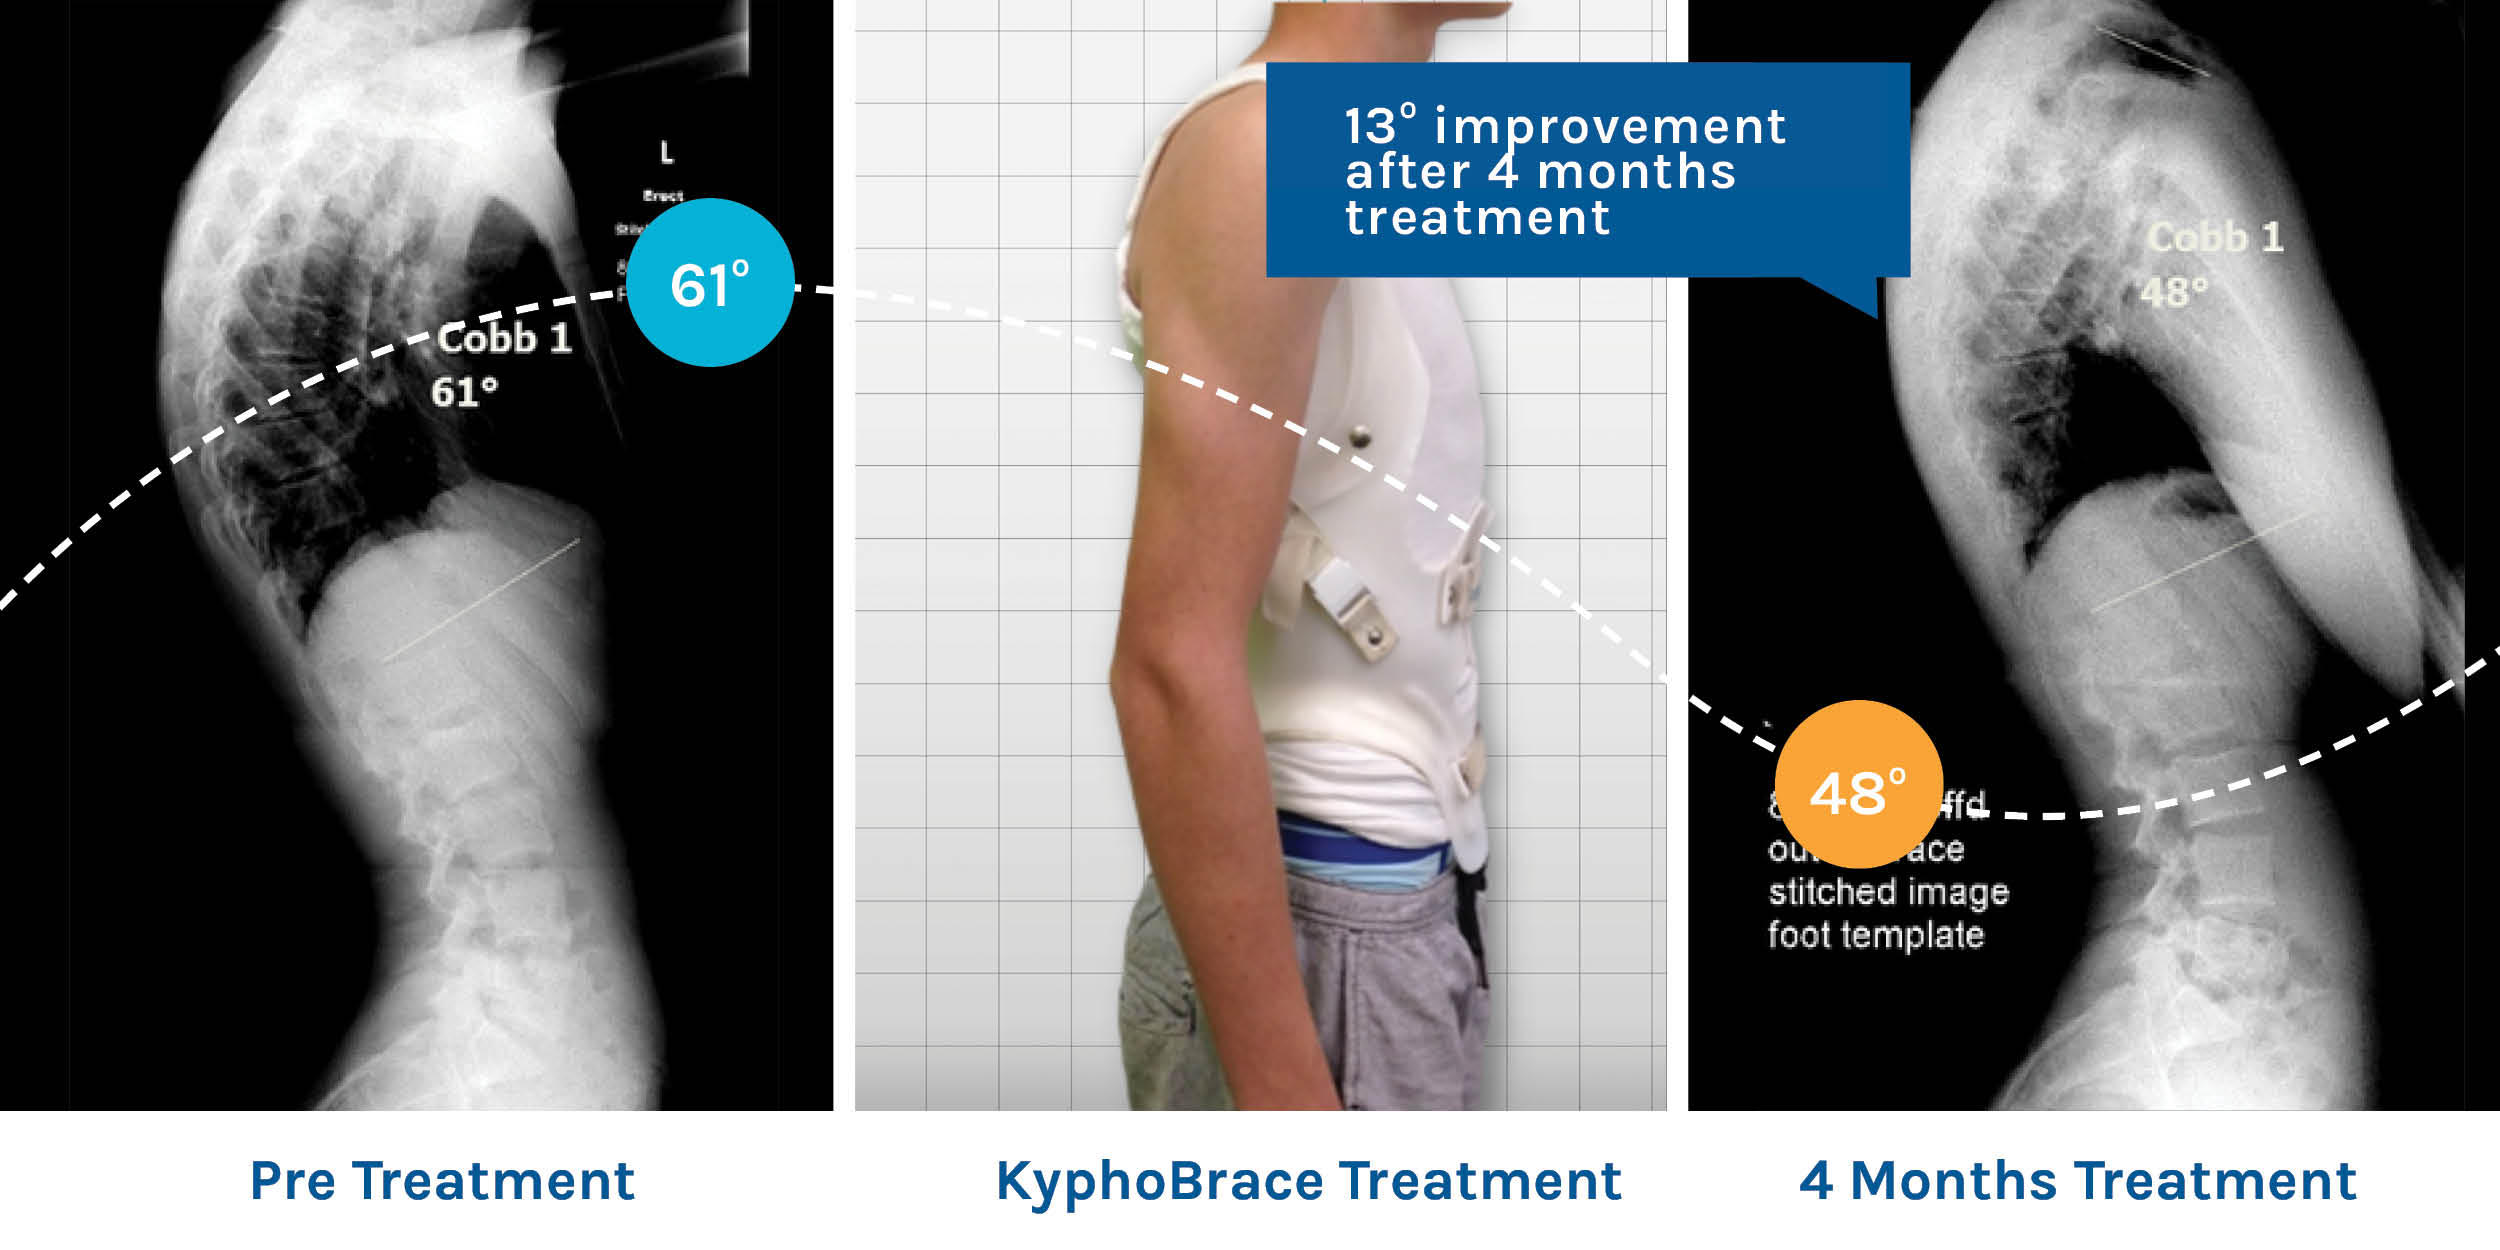 KyphoBrace is patient friendly and gets results